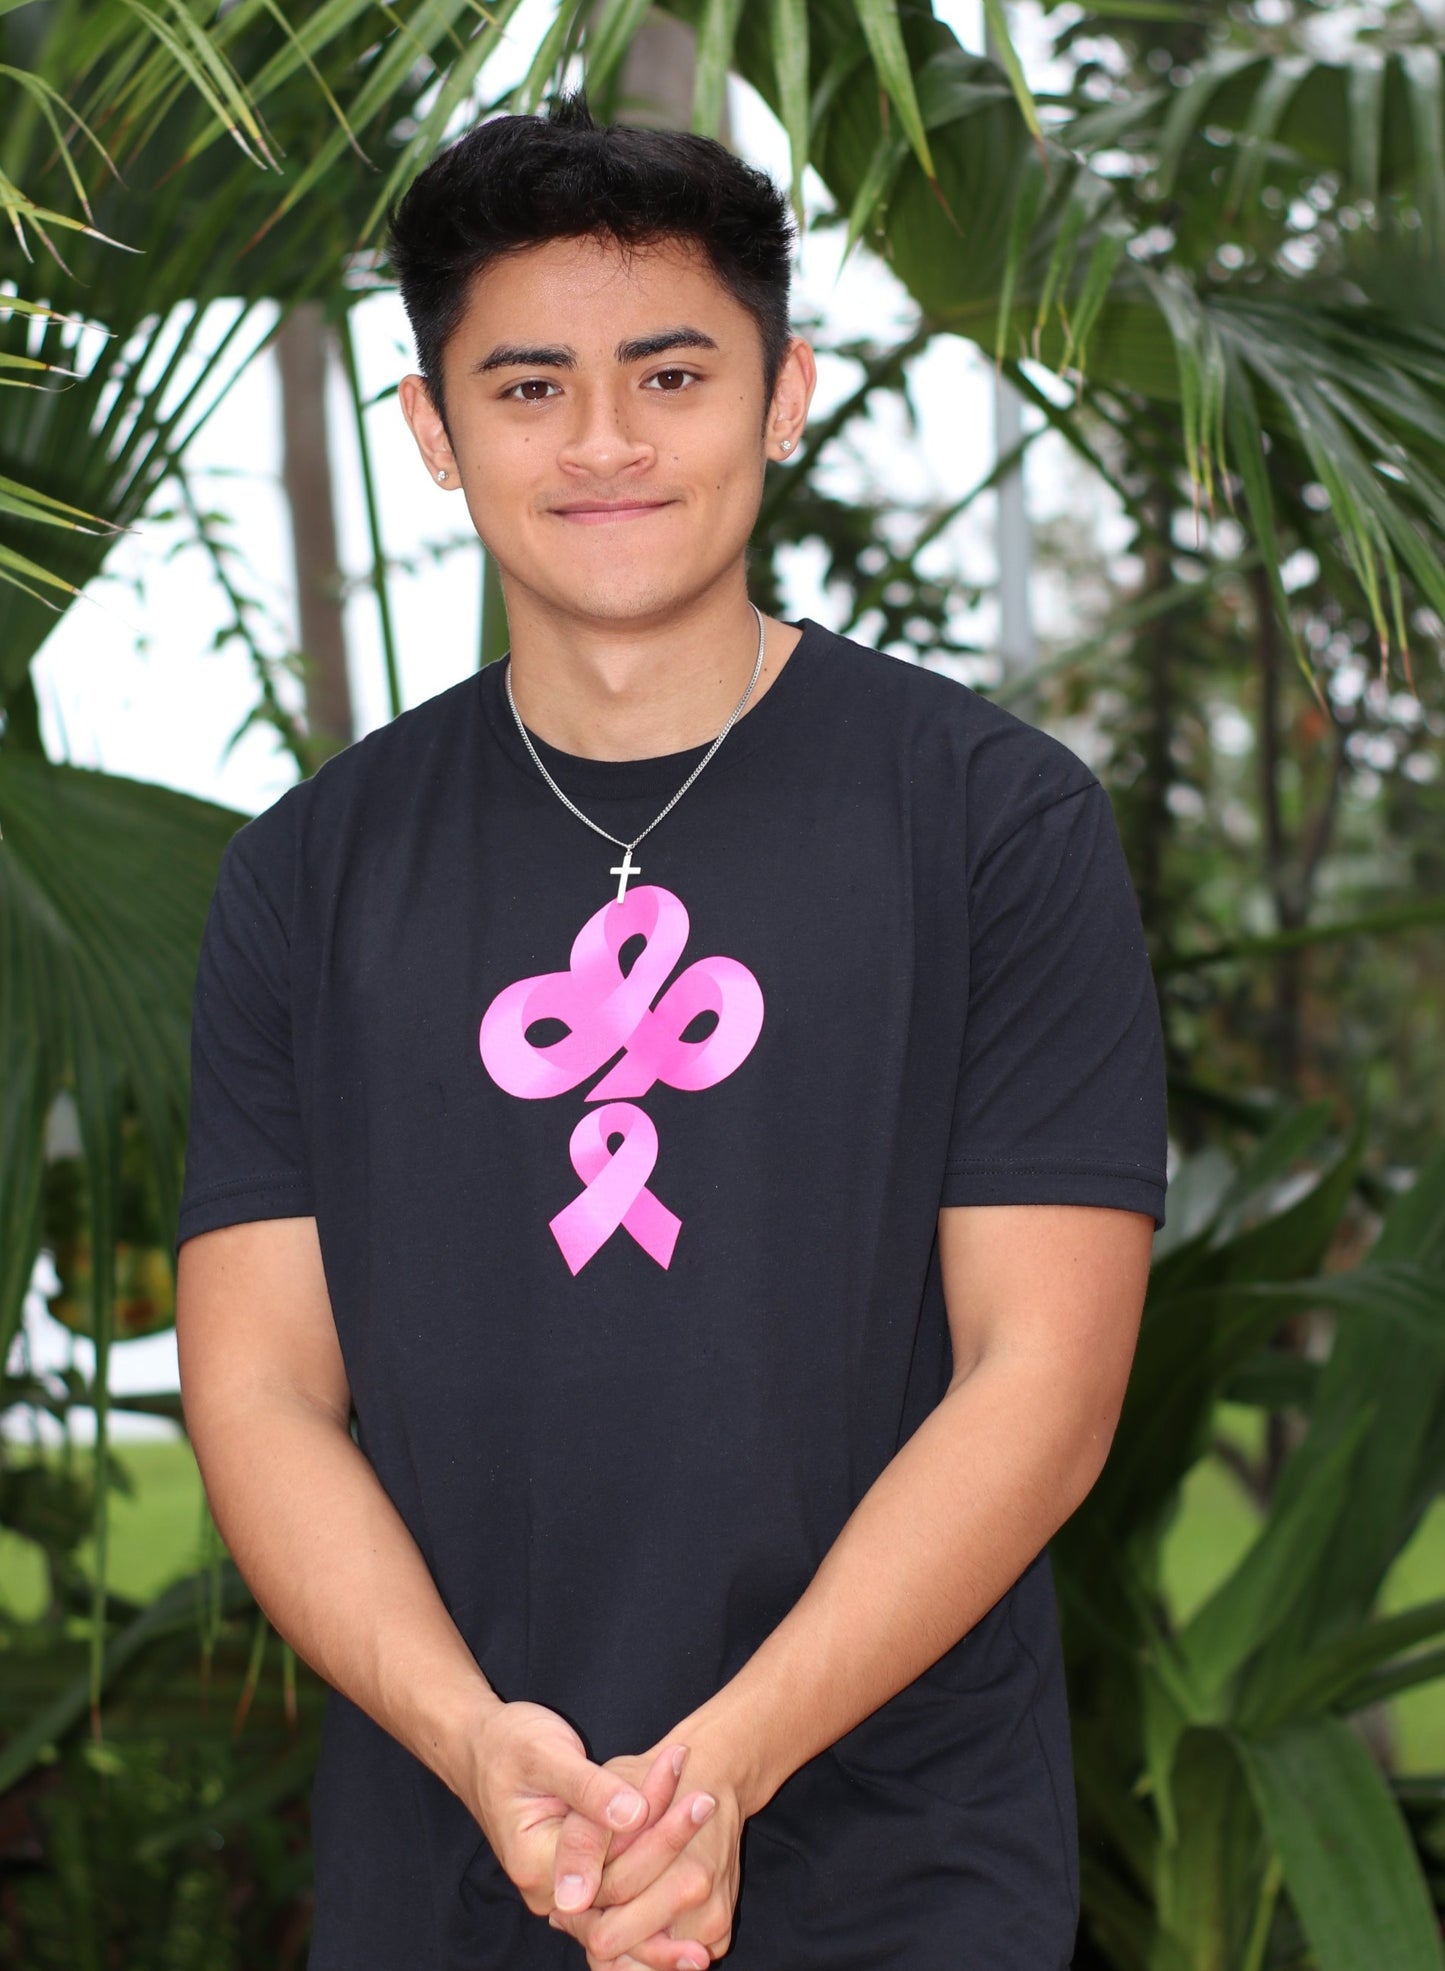 Help Fight Breast Cancer with the purchase of the IBP Ireland Boys pink ribbon logo on black nextlevel t-shirt worn by Ricky Ireland of Ireland Boys Productions